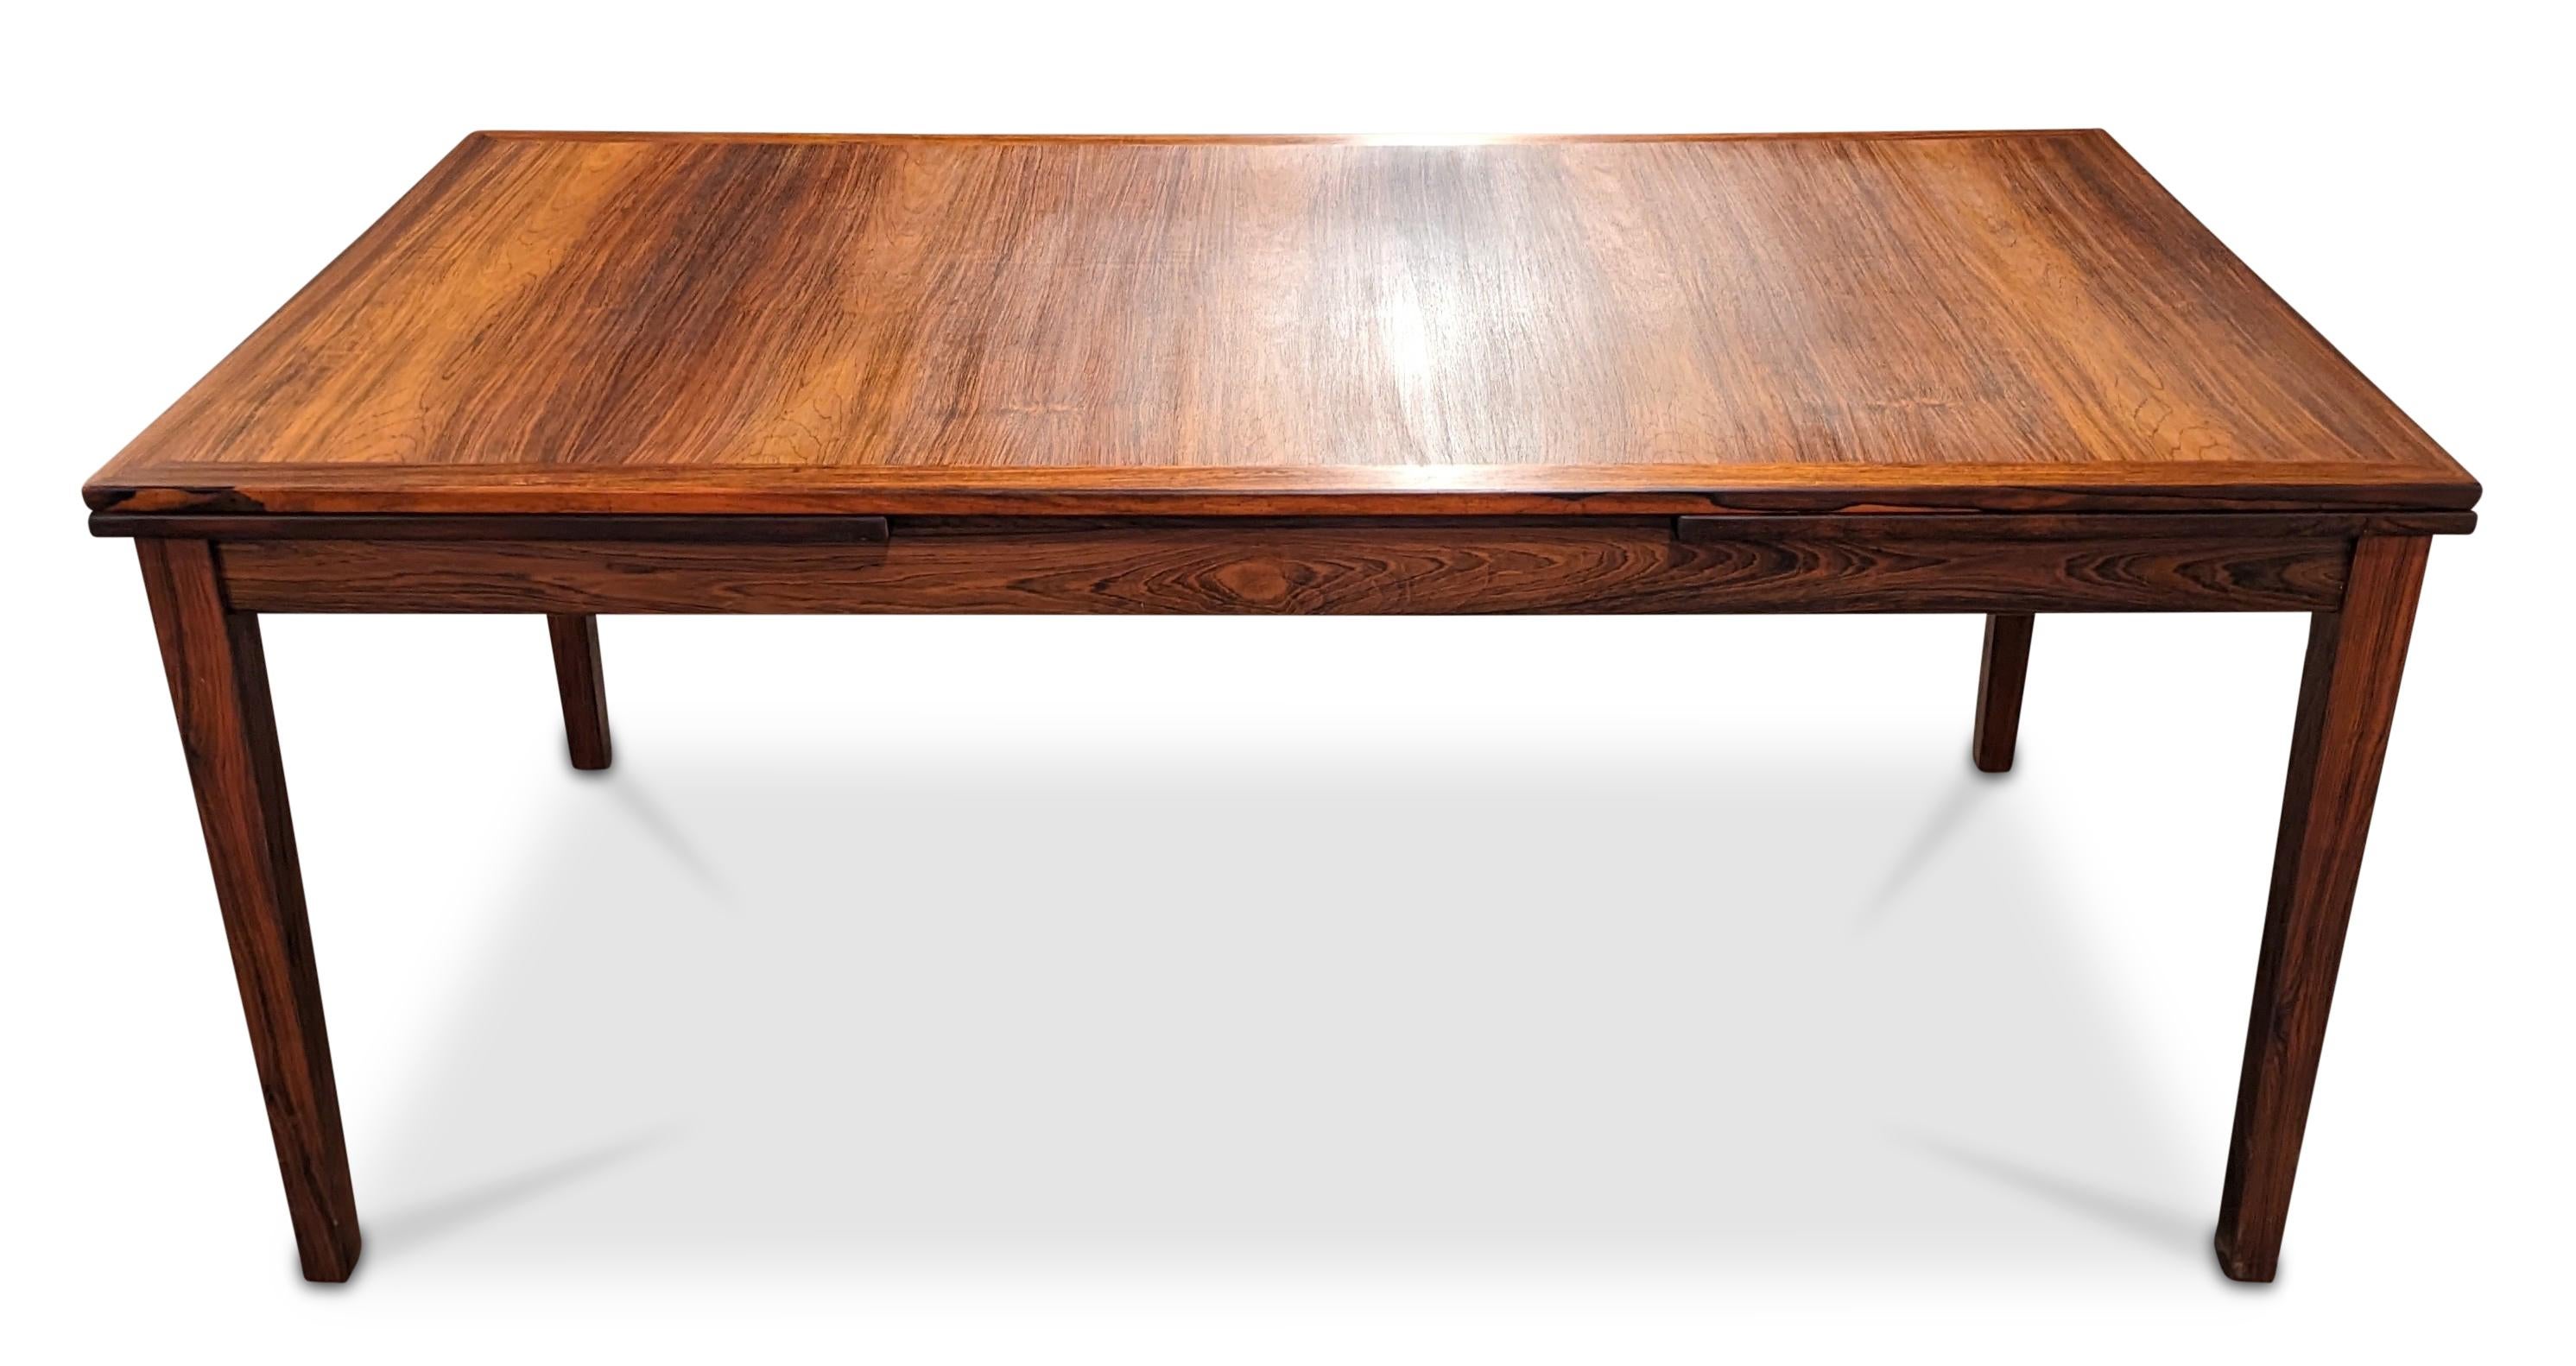 Kai Winding Rosewood Dining Table w Two Hidden Leaves, Vintage Danish 122299 5